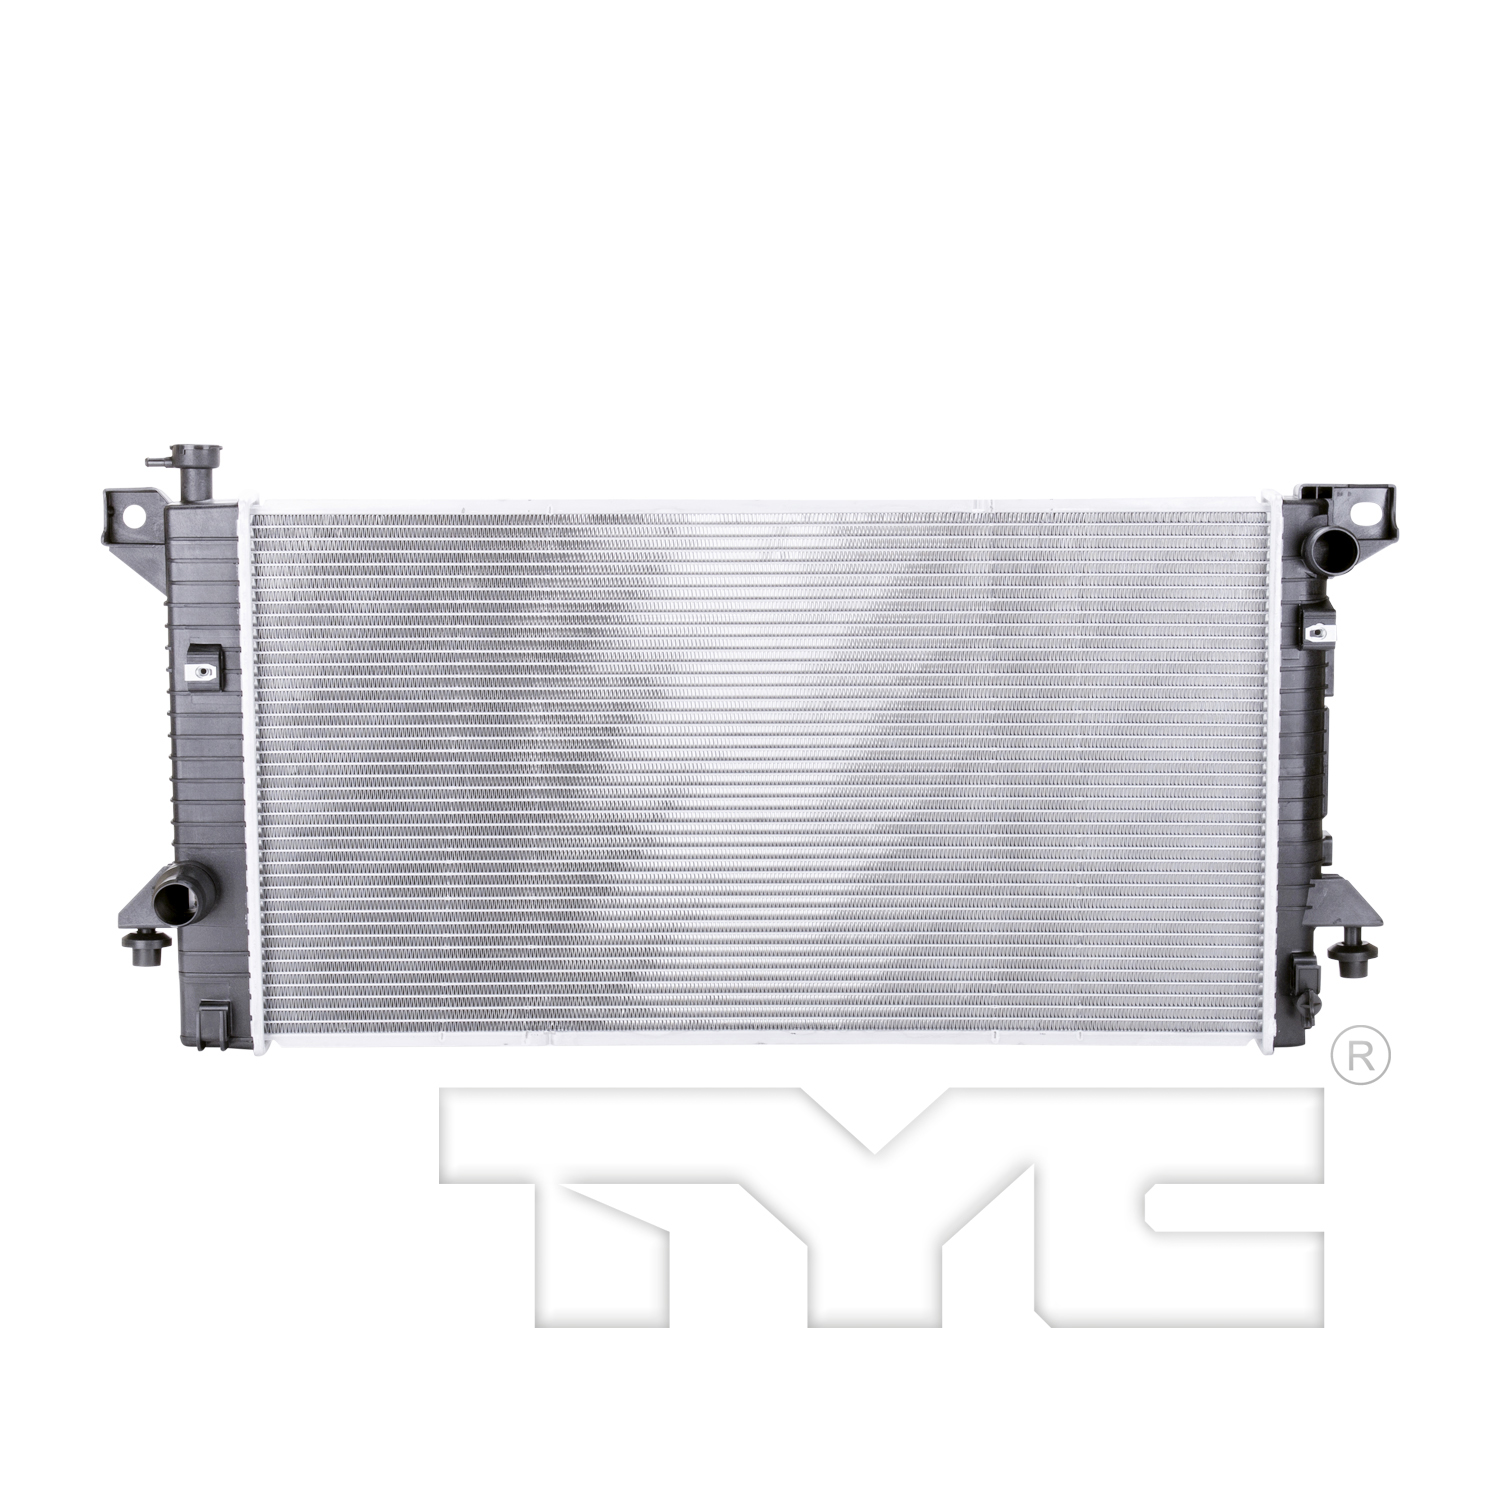 Aftermarket RADIATORS for FORD - EXPEDITION, EXPEDITION,09-14,Radiator assembly